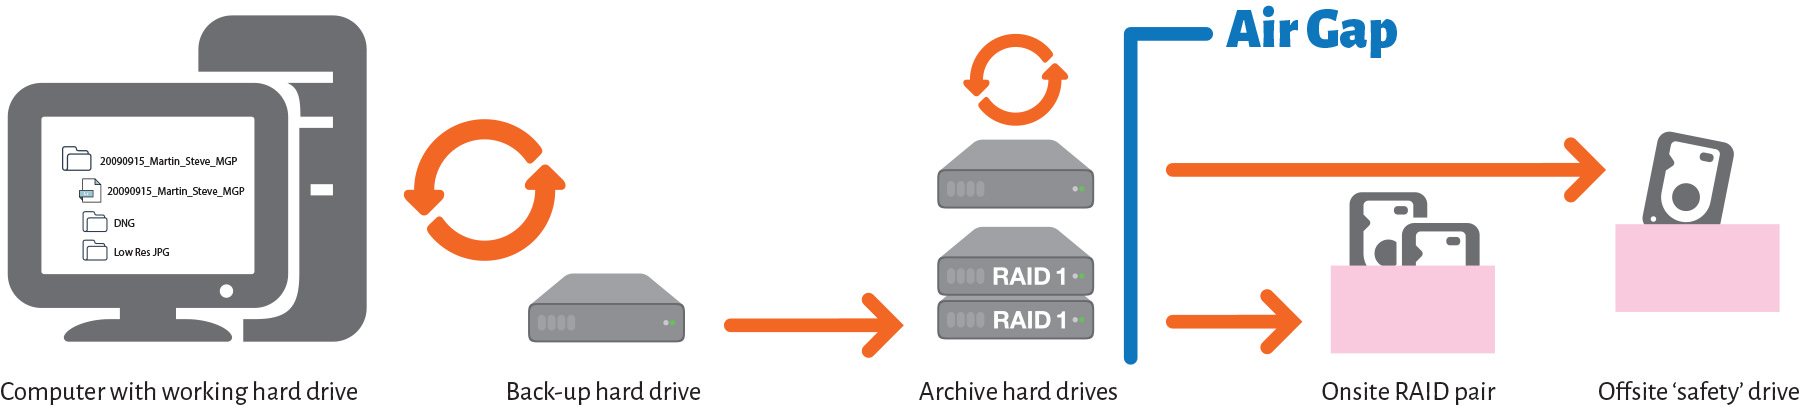 Air-Gapping and archiving workflow